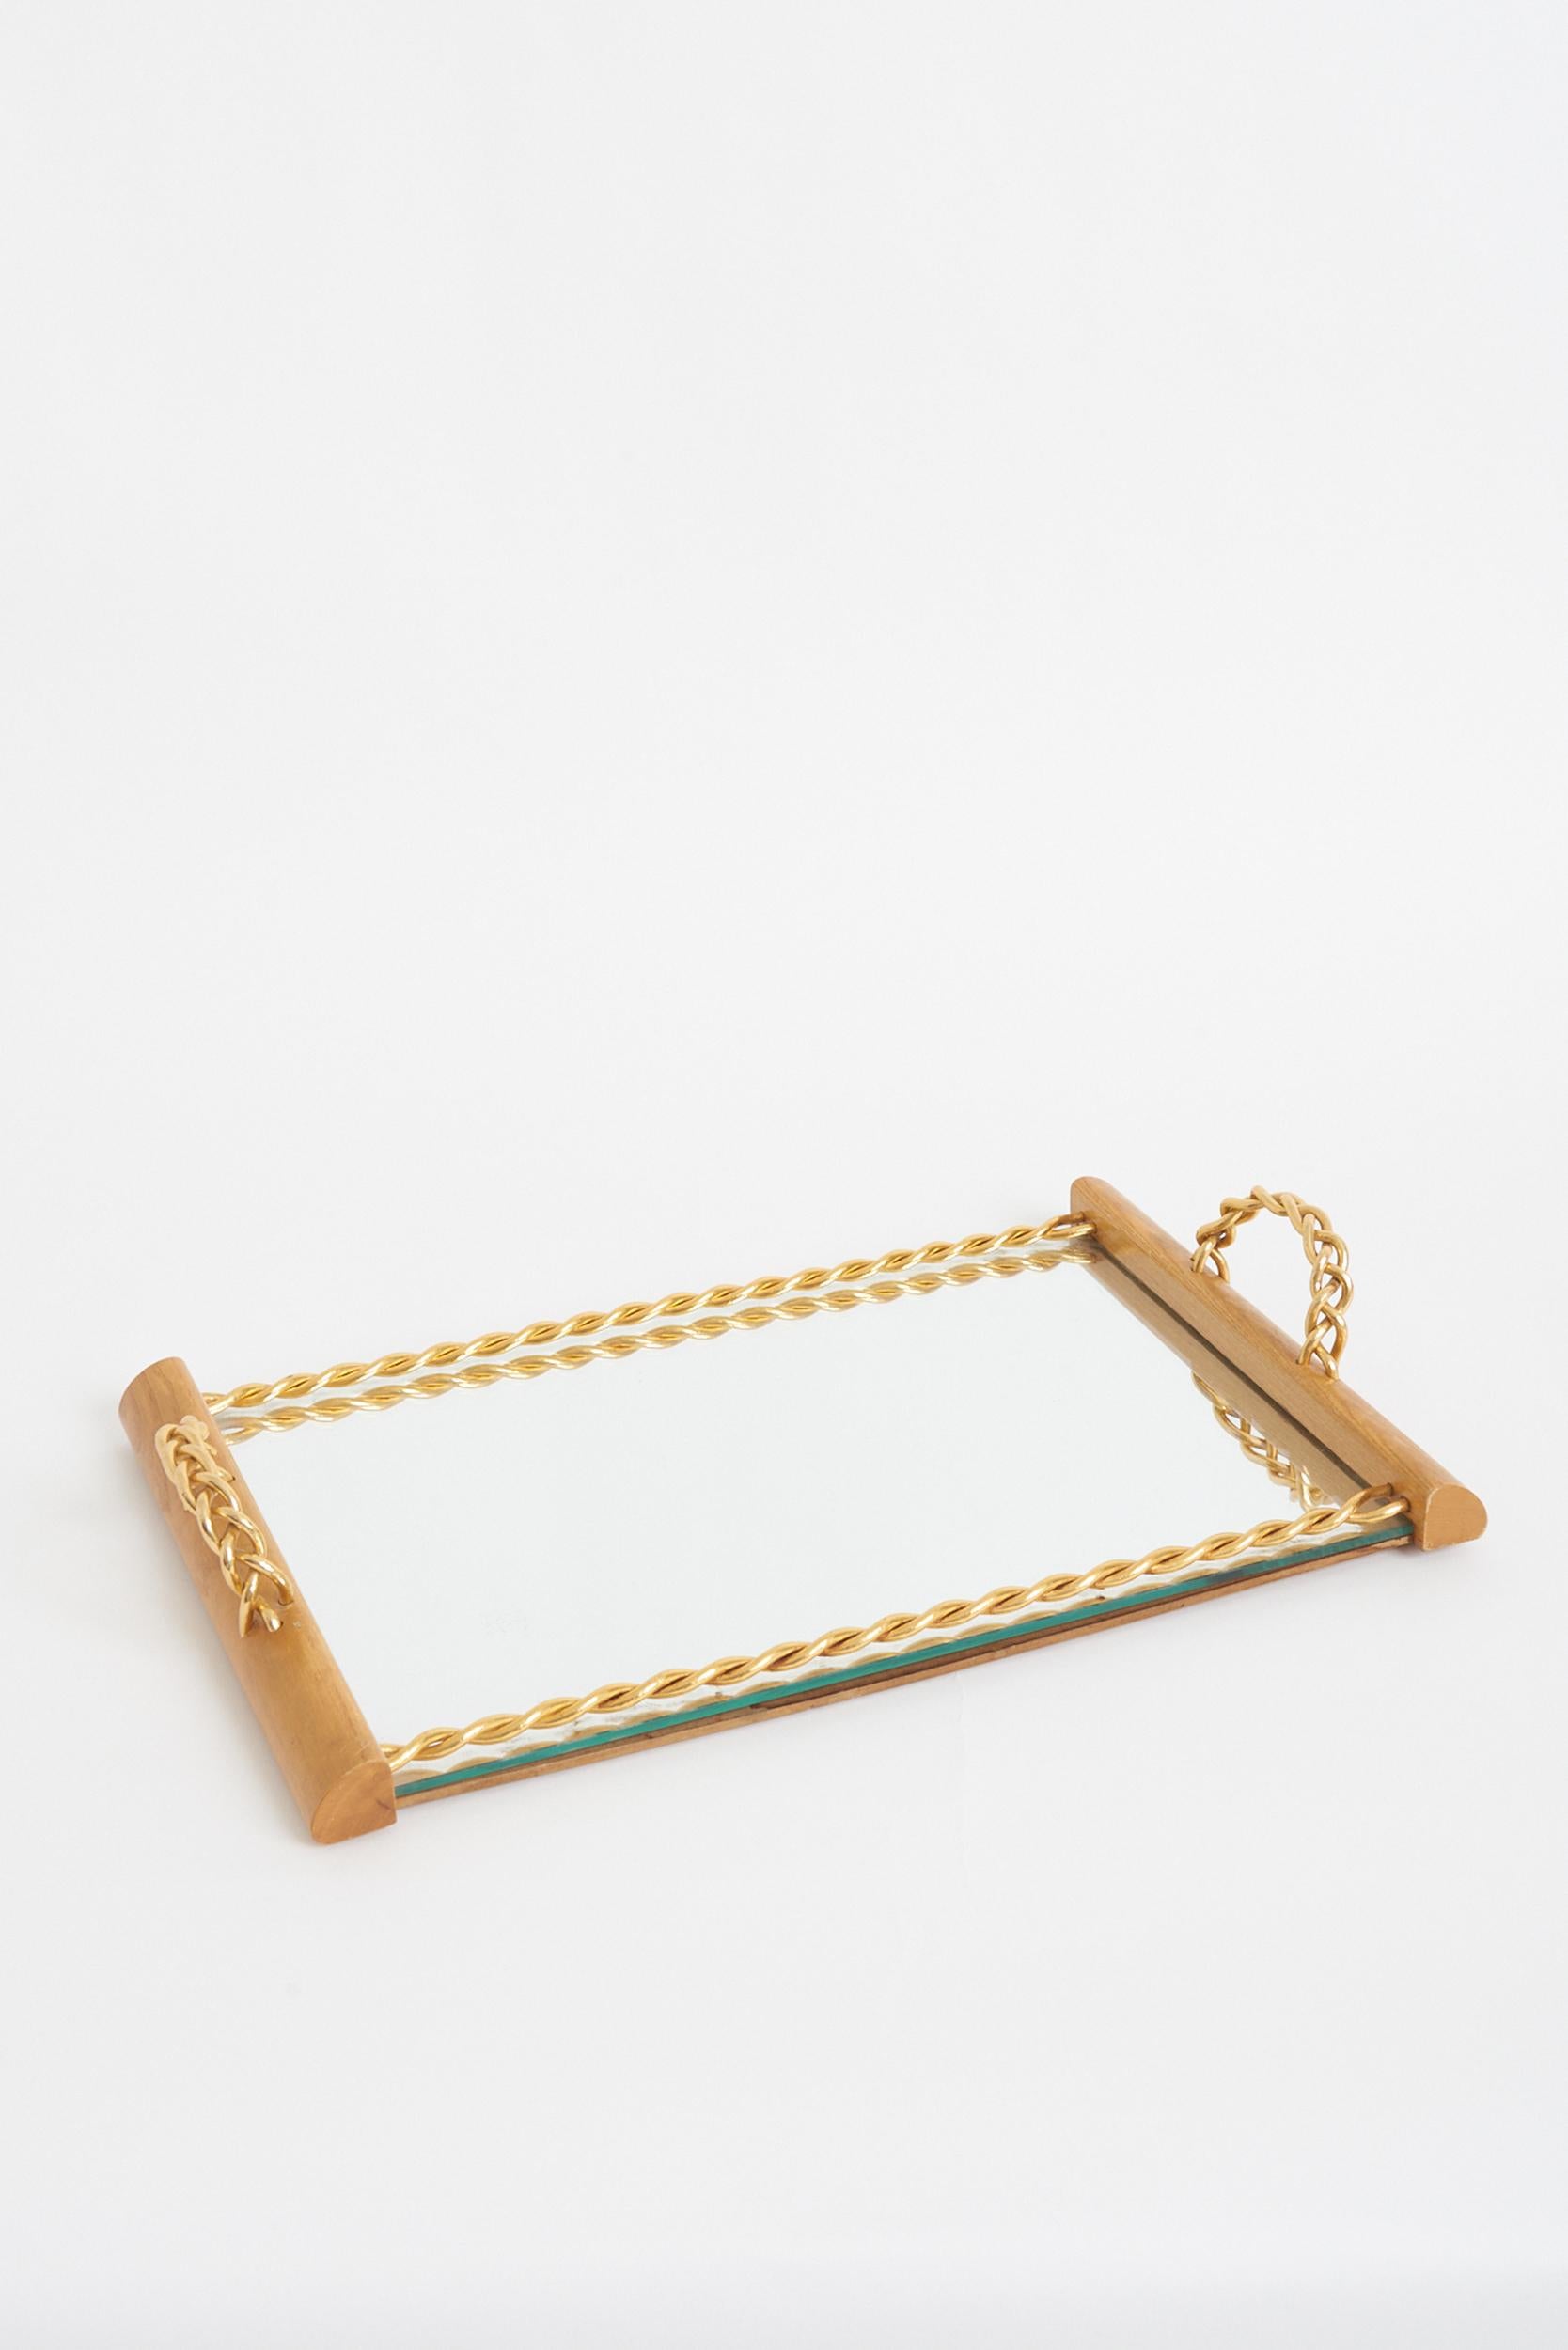 An oak mirrored tray, with gilt chain handles and frame.
France, circa 1940-1950.